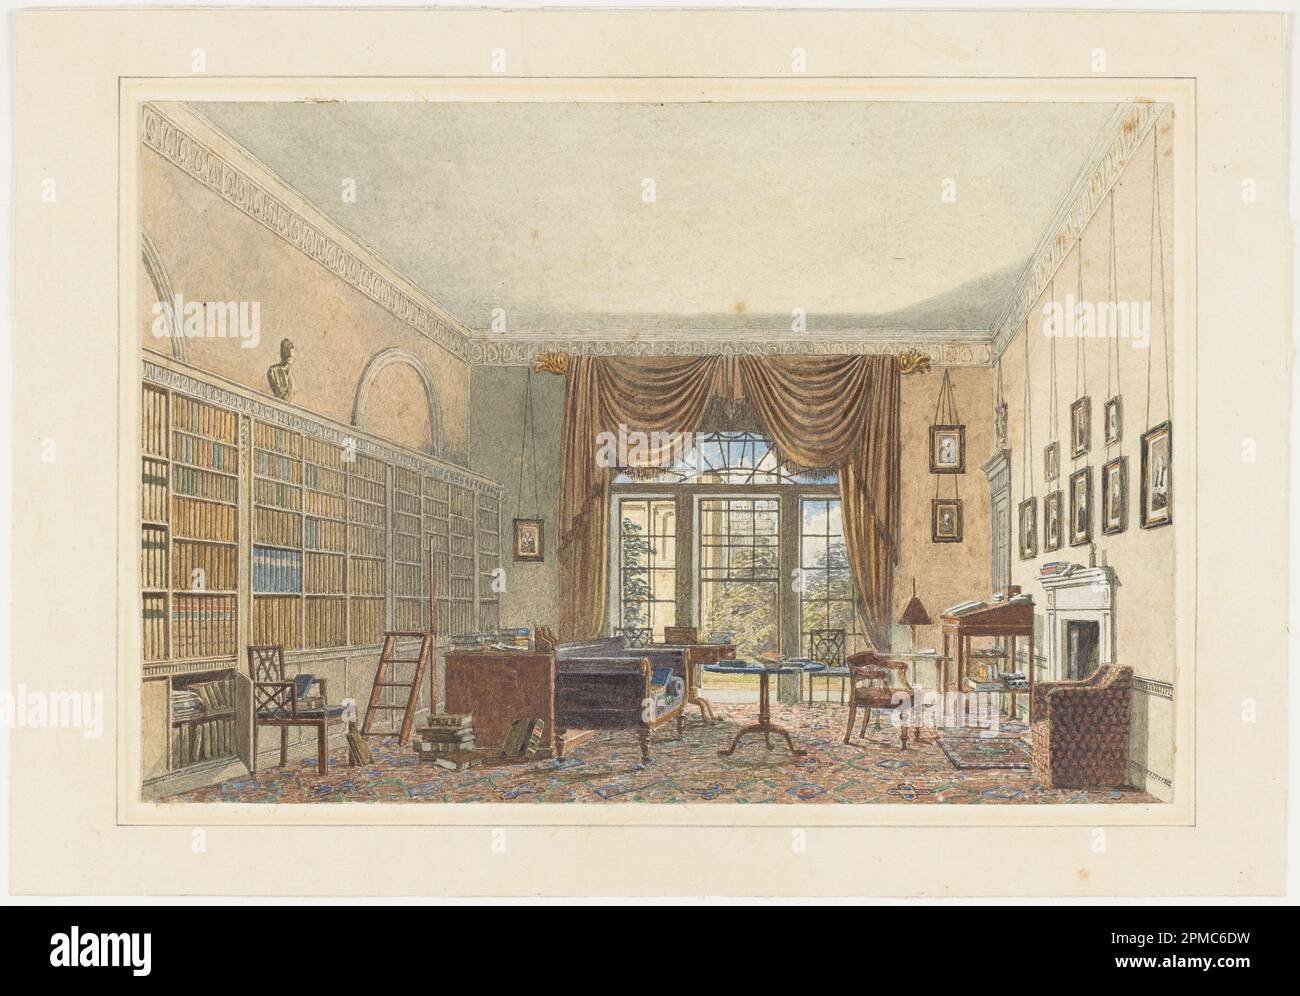 Watercolor, Interior of a Library; Unknown (English); brush and watercolor, graphite on paper; Frame H x W x D: 39.7 x 50.2 x 2.5 cm (15 5/8 x 19 3/4 x 1 in.) Sheet: 21.3 x 31.6 cm (8 3/8 x 12 7/16 in.); Thaw Collection; 2007-27-28 Stock Photo